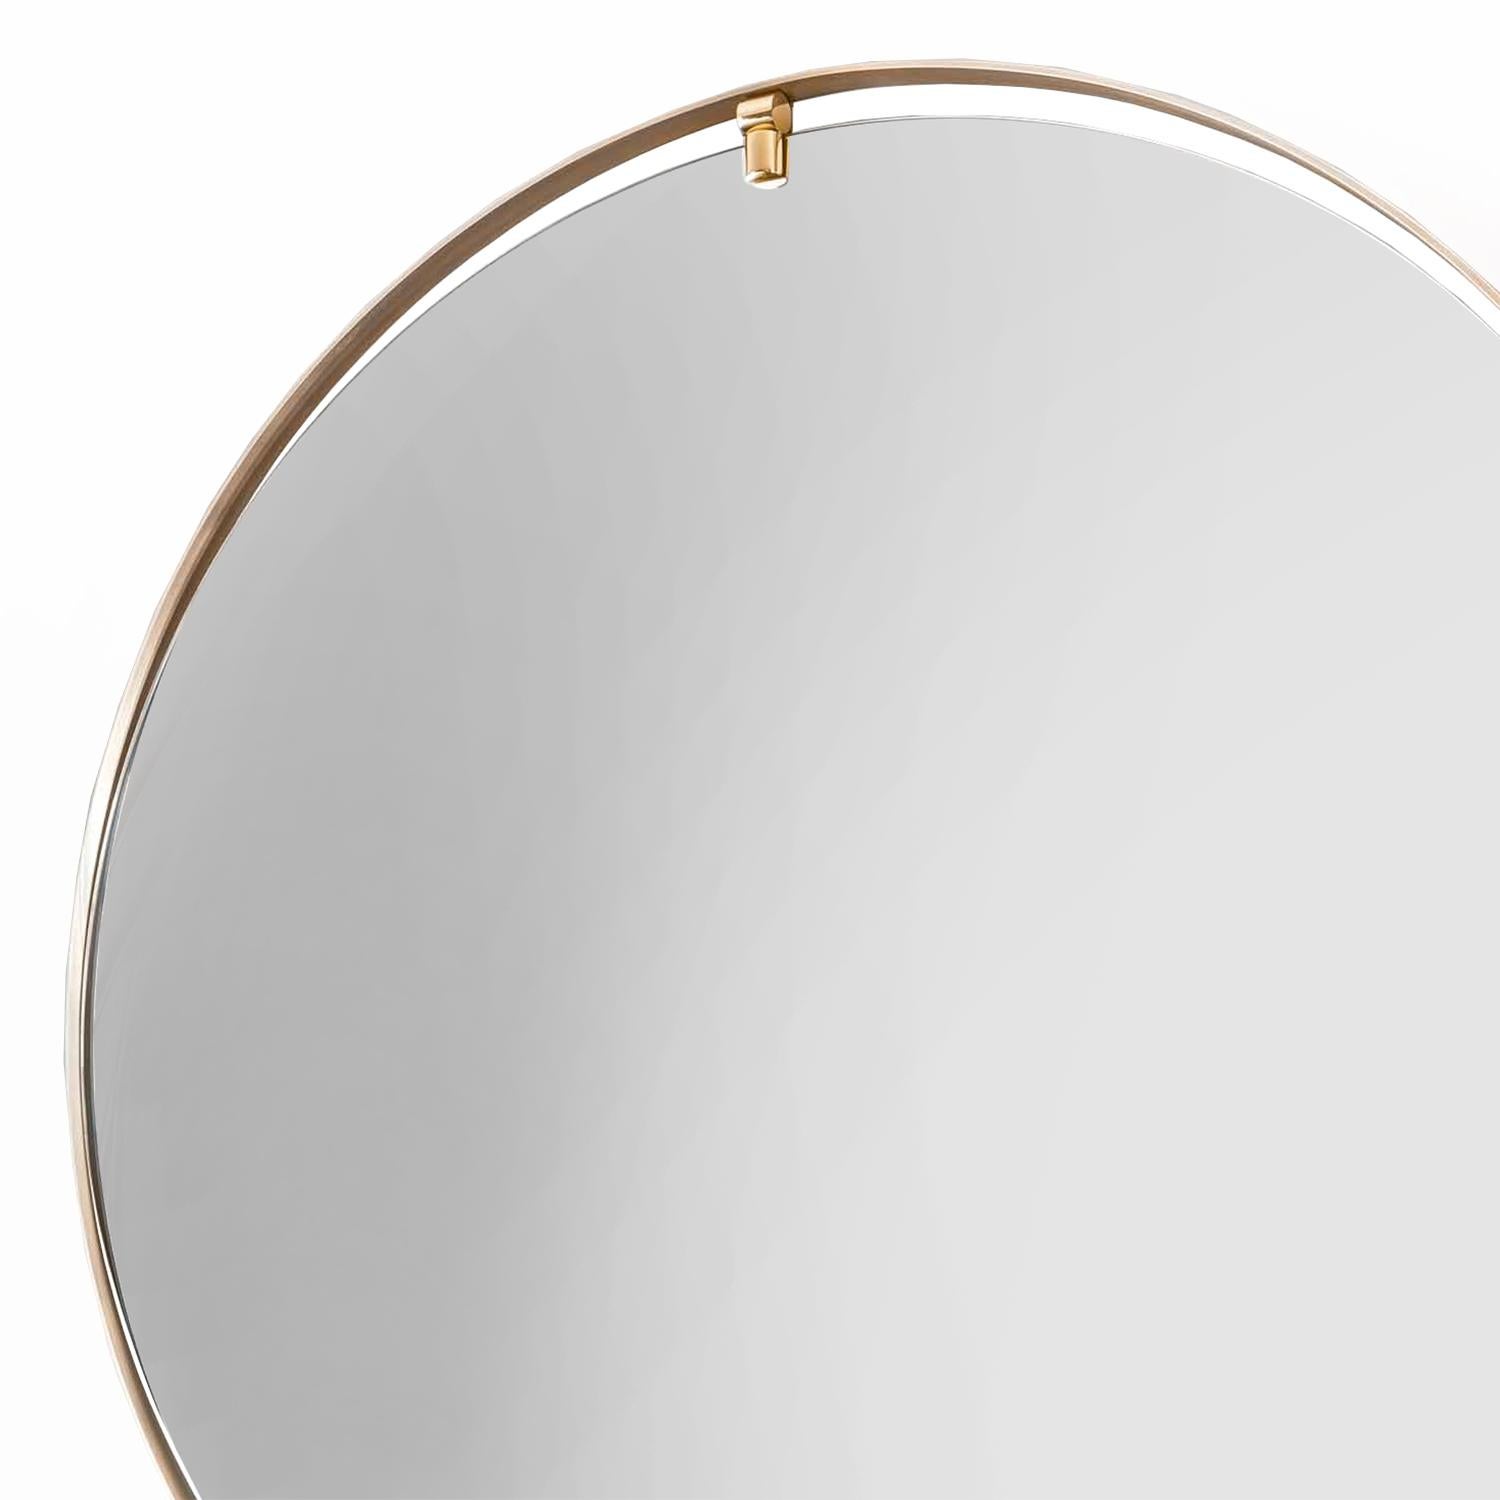 Mirror Dolce with round mirror glass and with
Solid brass round frame in bronzed finish. With
2 fixture in solid brass in polished finish at the
Top and at the bottom of the mirror.